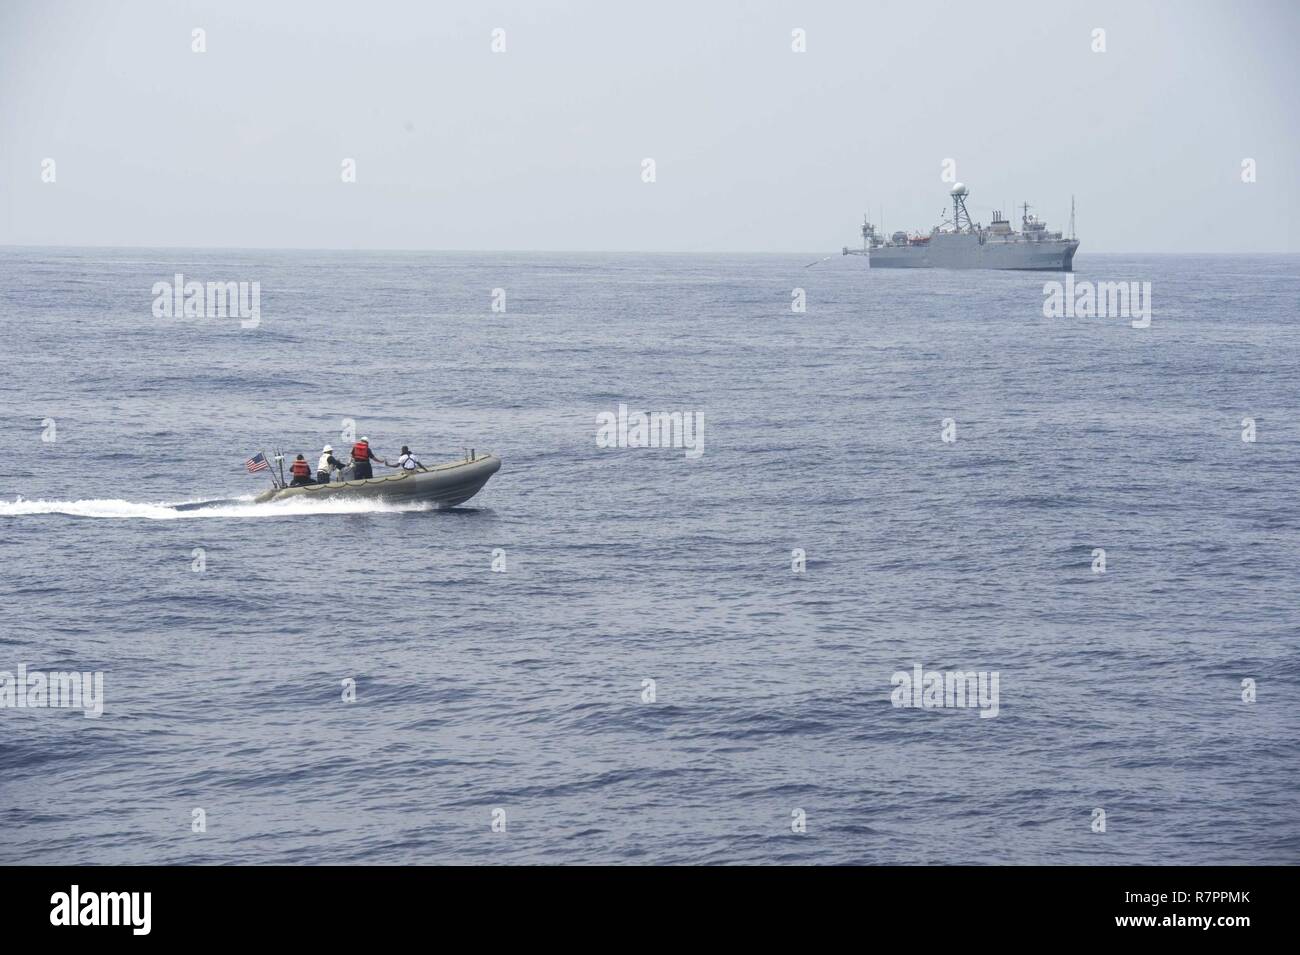 SOUTH CHINA SEA (March 23, 2017) Crew members of the forward-deployed Arleigh Burke-class guided-missile destroyer USS Fitzgerald (DDG 62) drive a rigid hull inflatable boat (RHIB) during a personnel transfer. Fitzgerald is in the U.S. 7th Fleet area of operations supporting security and stability in the Indo-Asia-Pacific region. Stock Photo